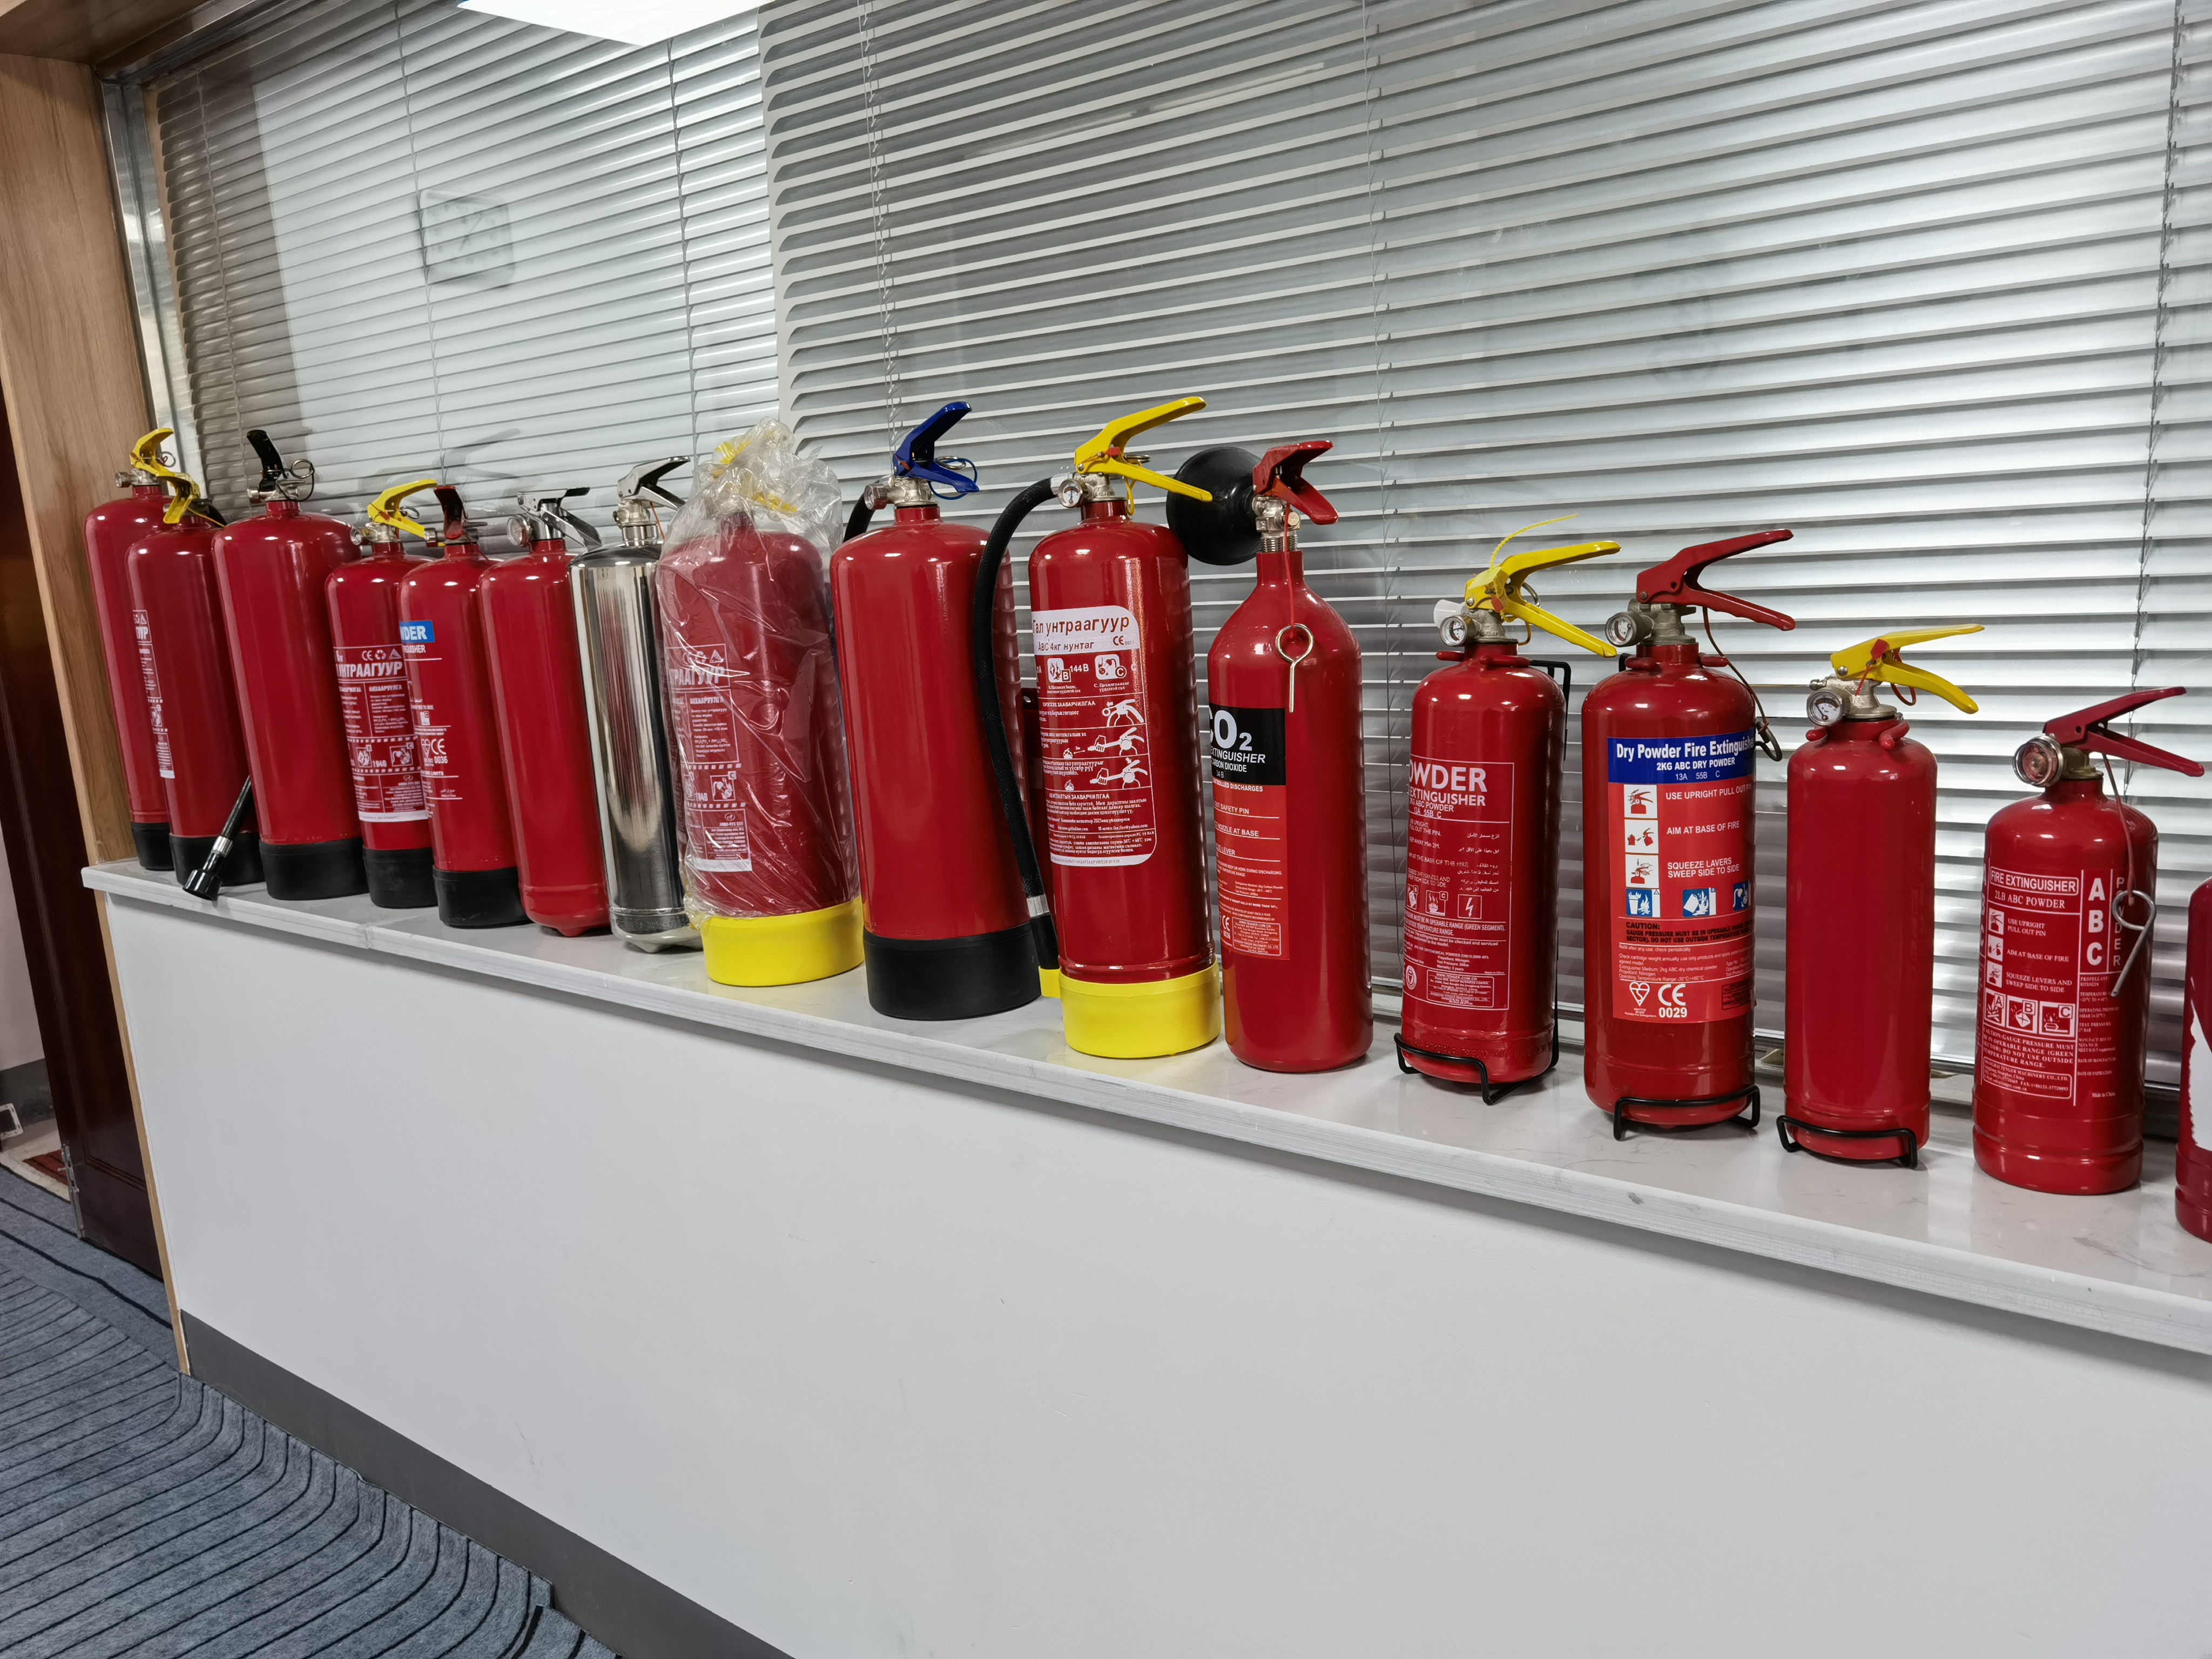 Dry Powder Fire Extinguisher for Wood